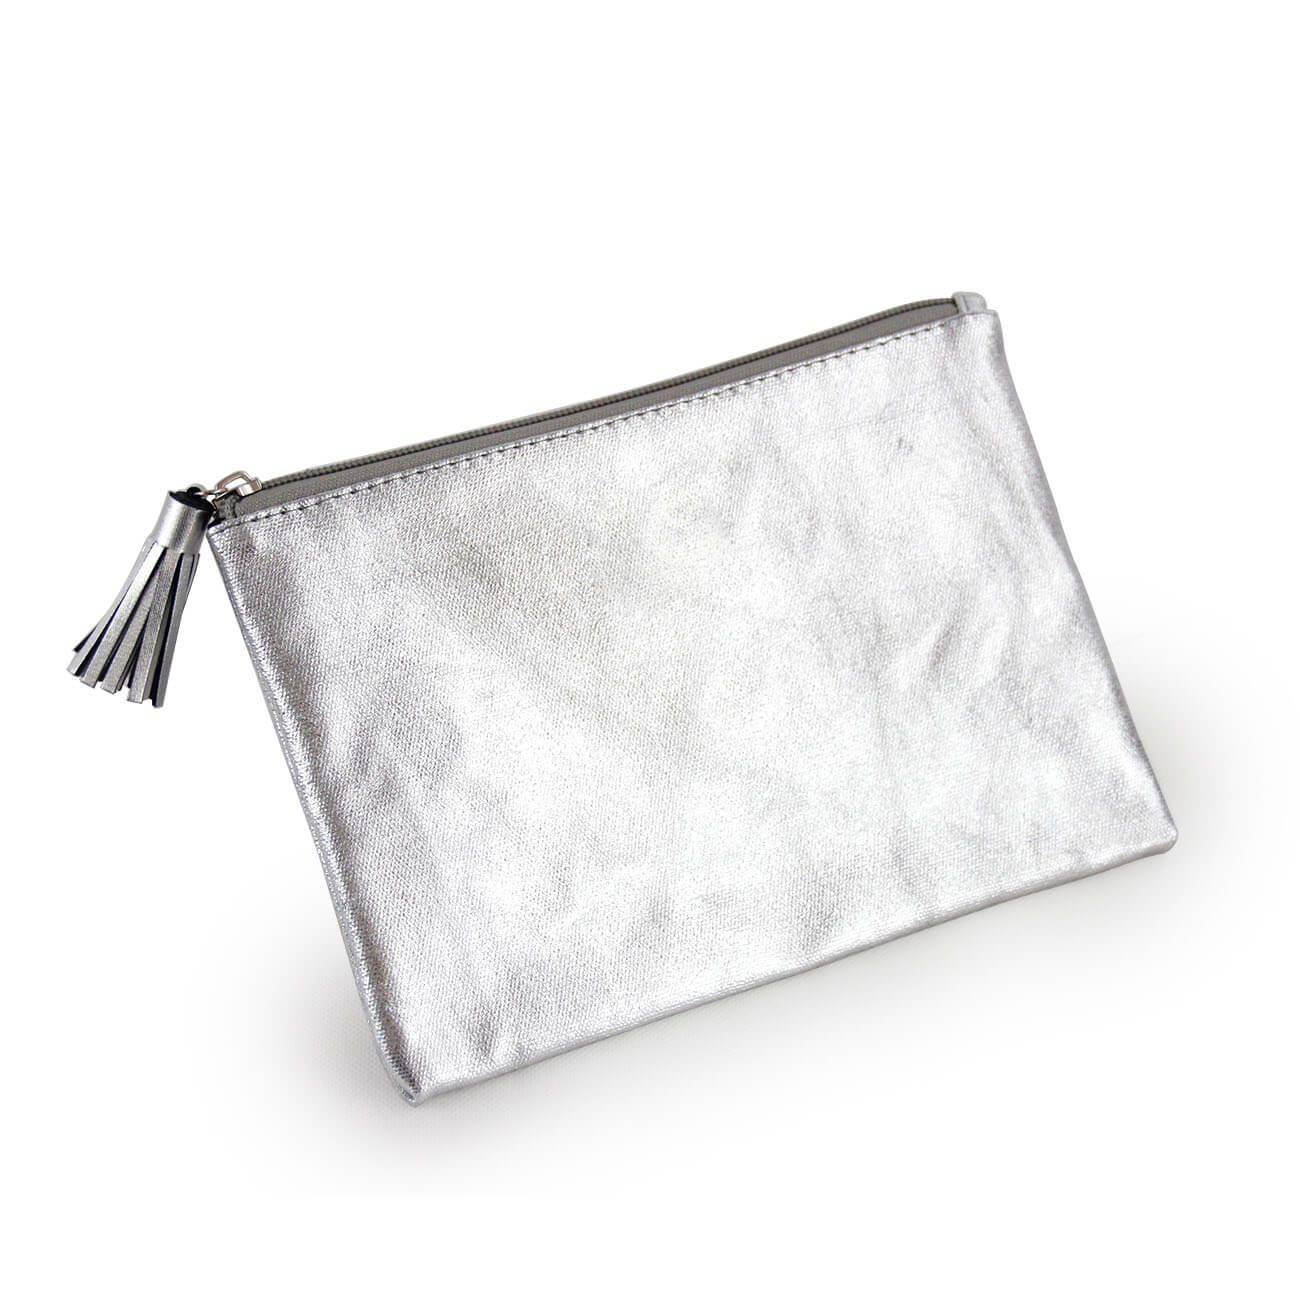 Laminated Silver Canvas Makeup Pouch